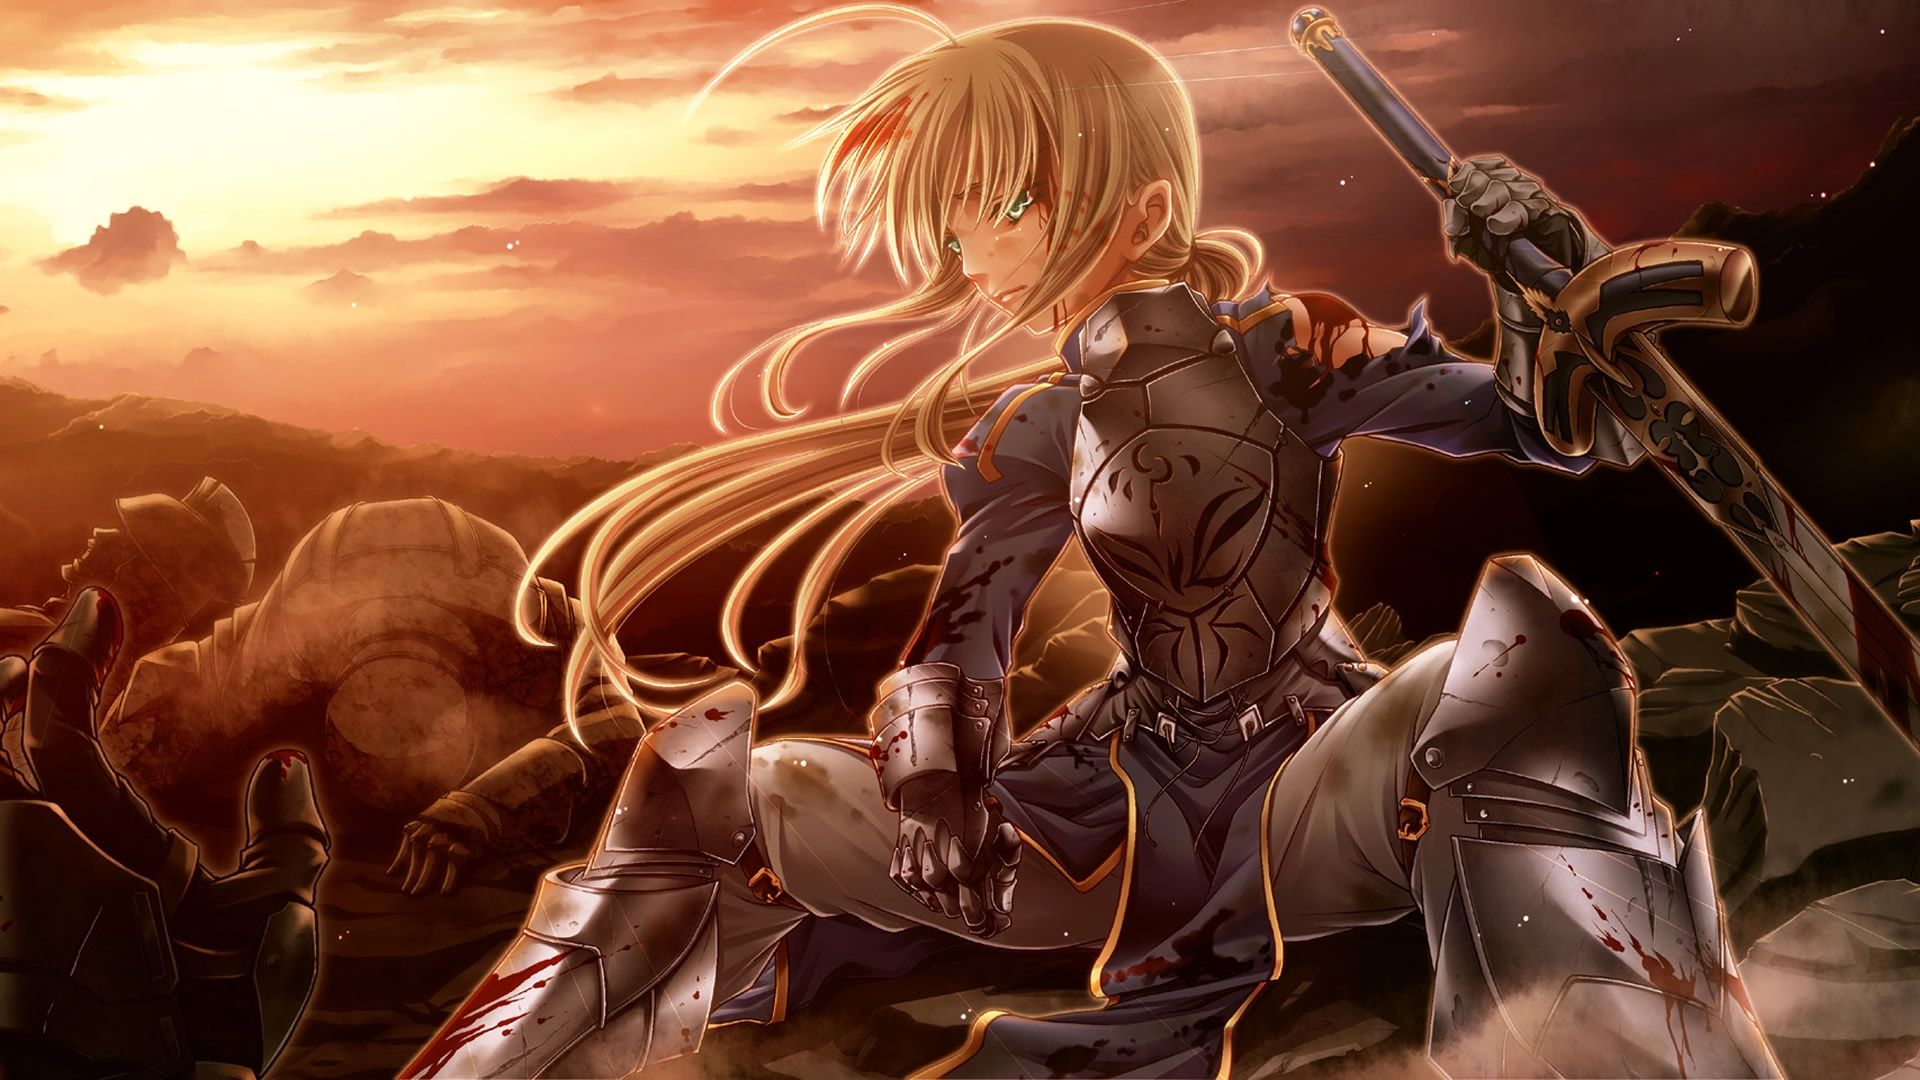 Download Wallpaper, Download sunset fatestay night blood weapons armor saber anime girls swords fate series 1920x1080 wallpa Wallpaper –Free Wallpaper Download